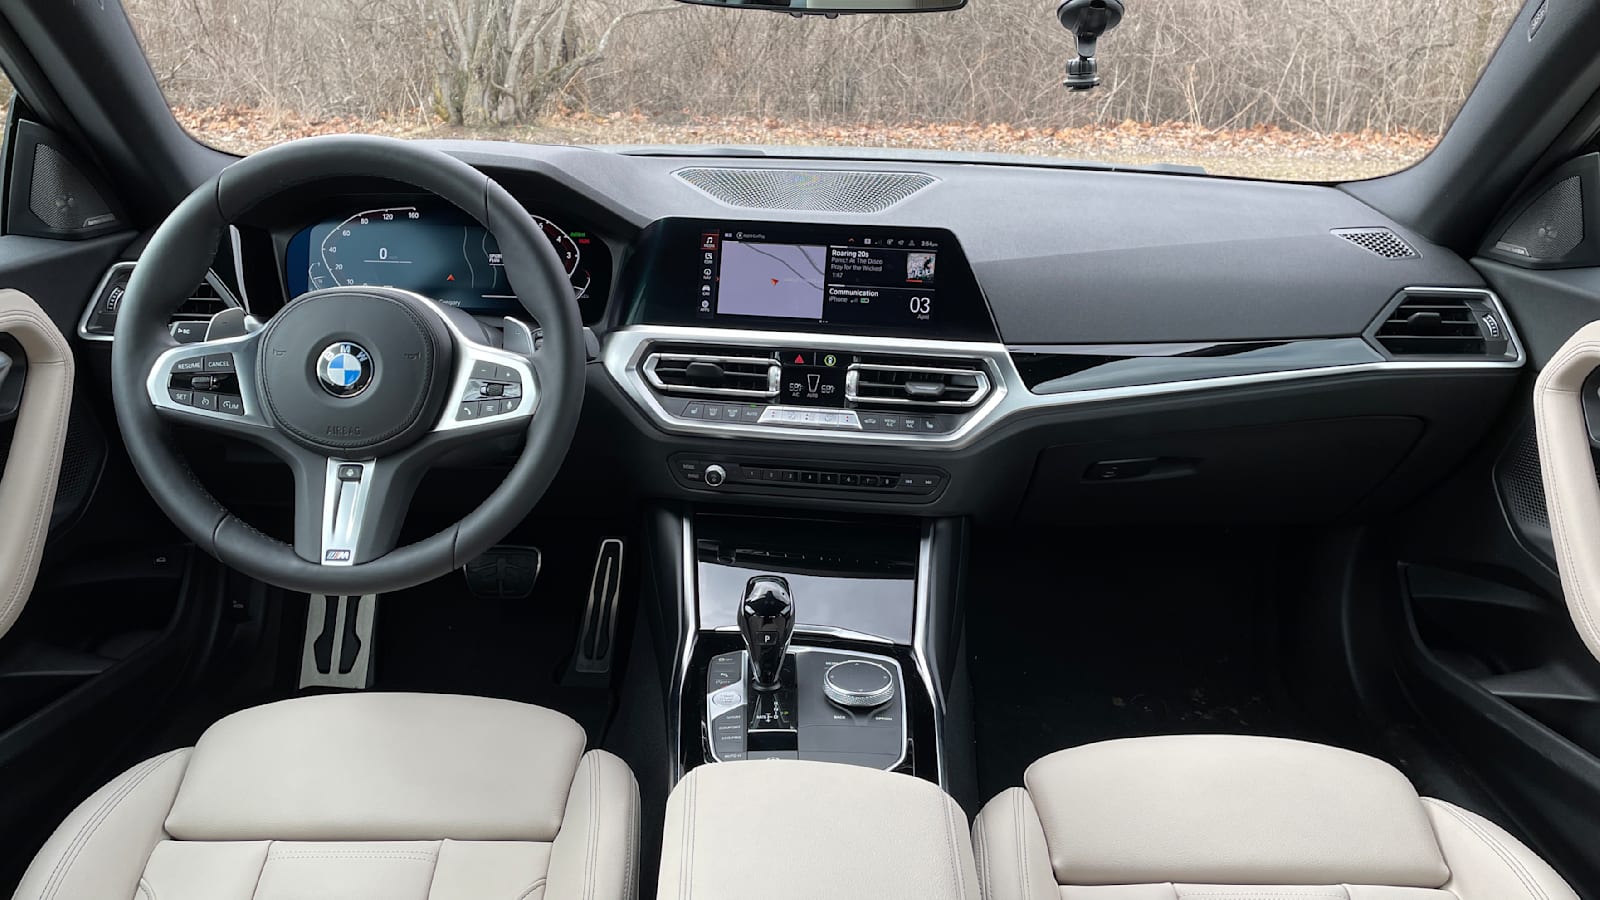 2022 BMW 2 Series Interior Review | Personal luxury compact coupe |  Autoblog - Autoblog